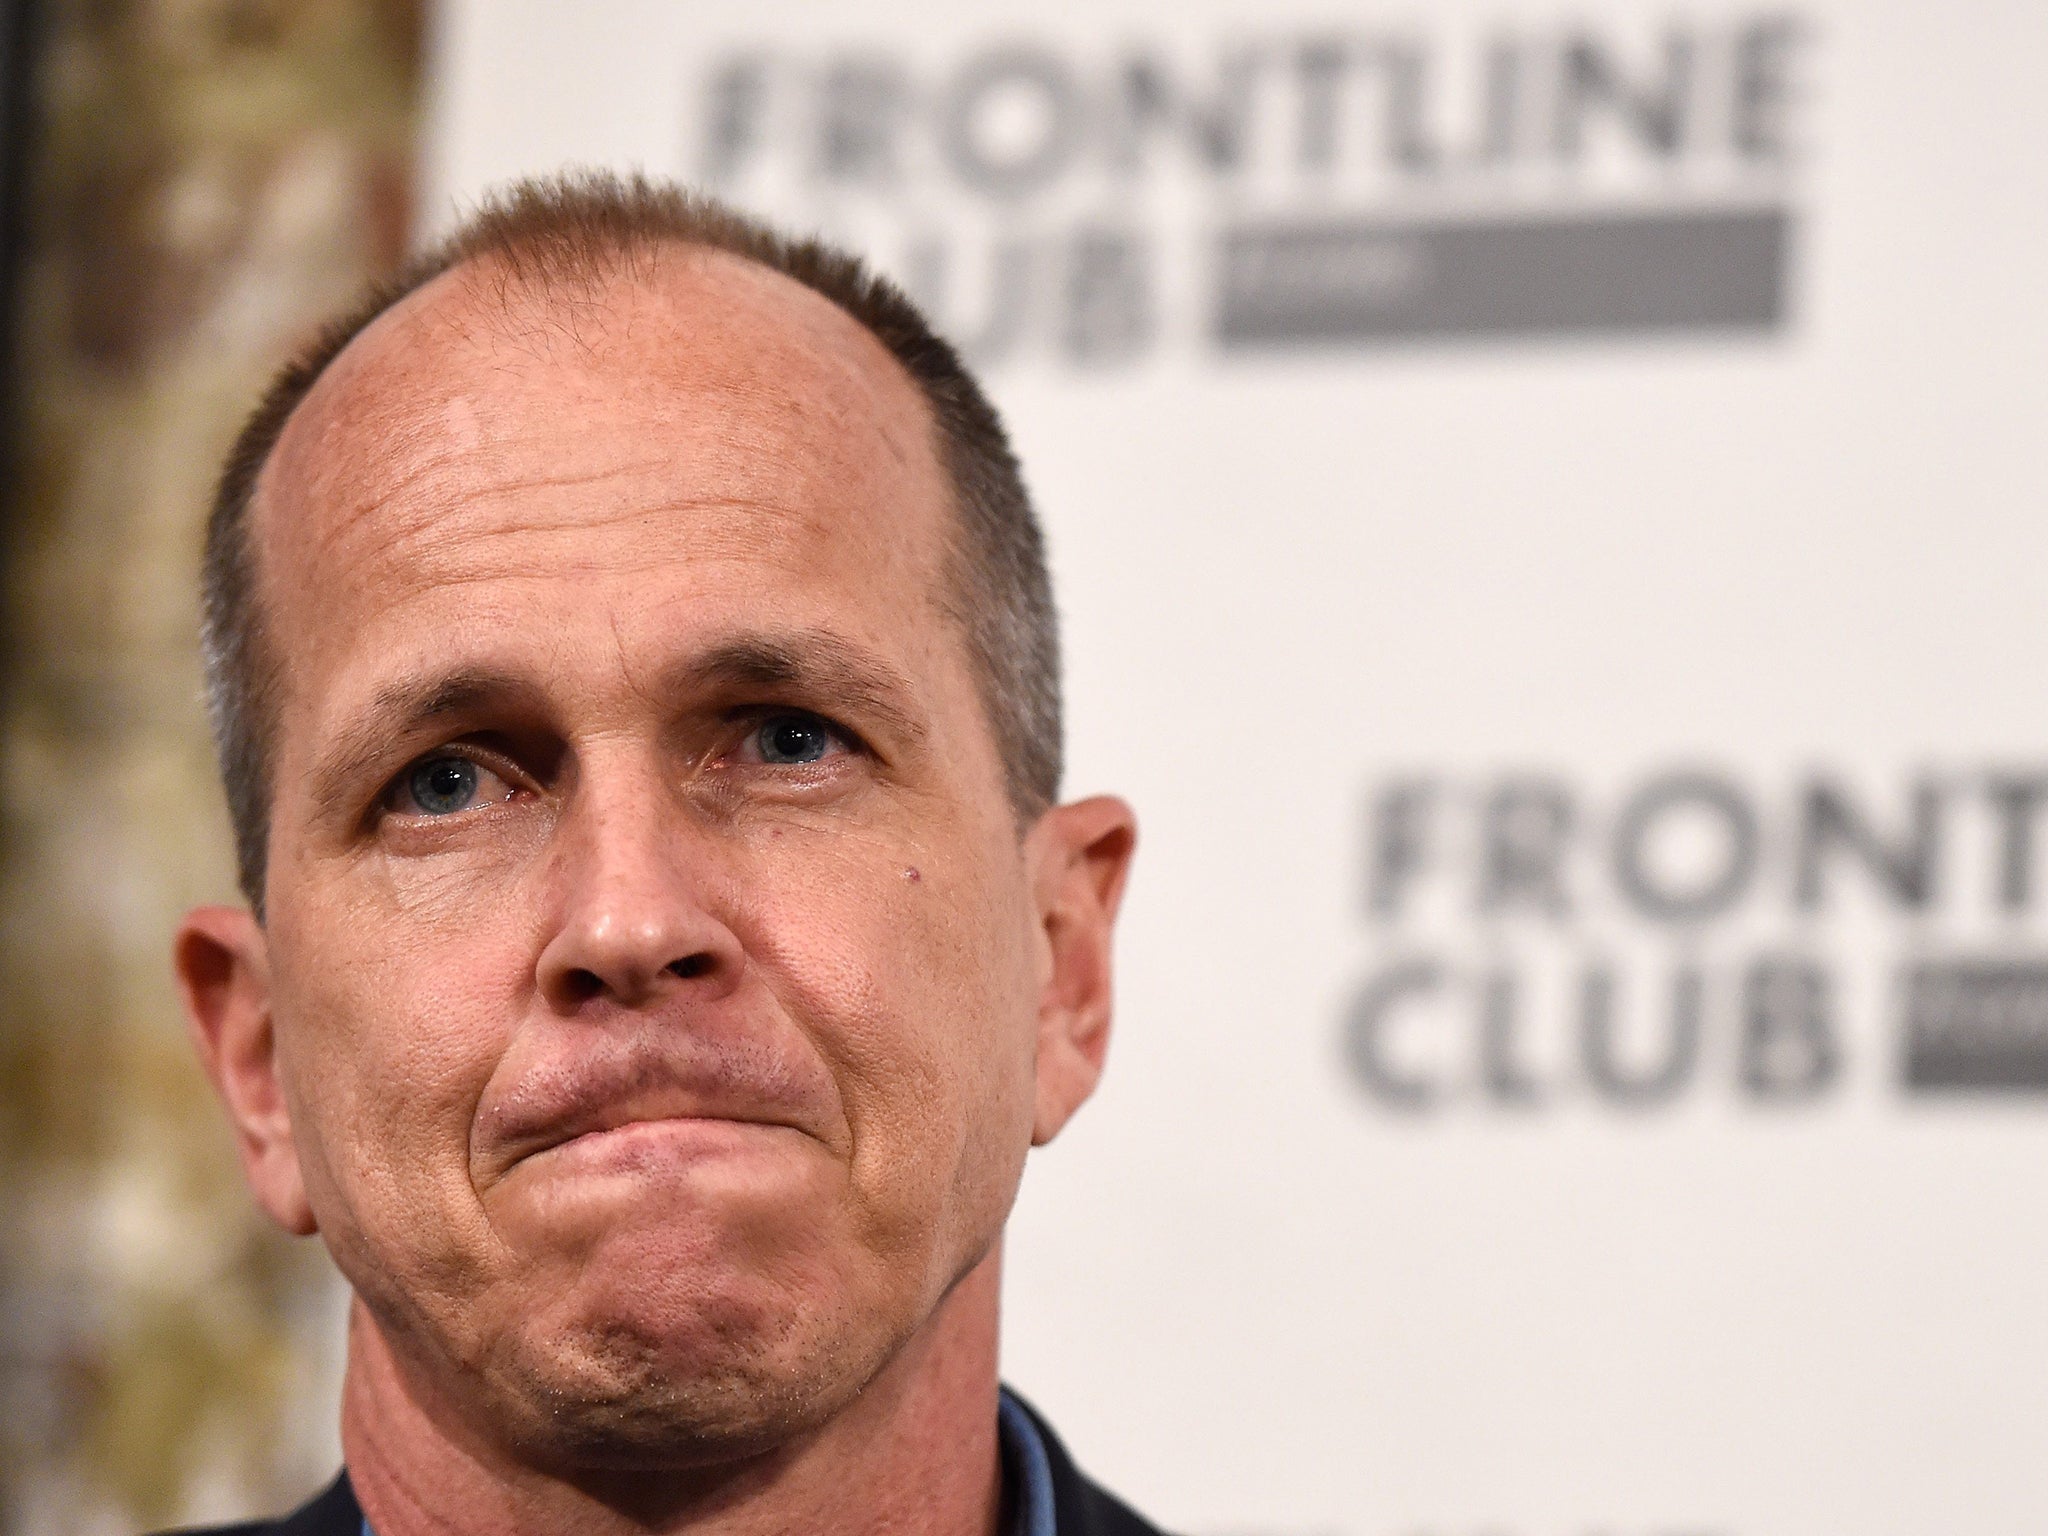 Al Jazeera journalist Peter Greste arrived back in Australia after he was released from a Cairo jail at the start of February